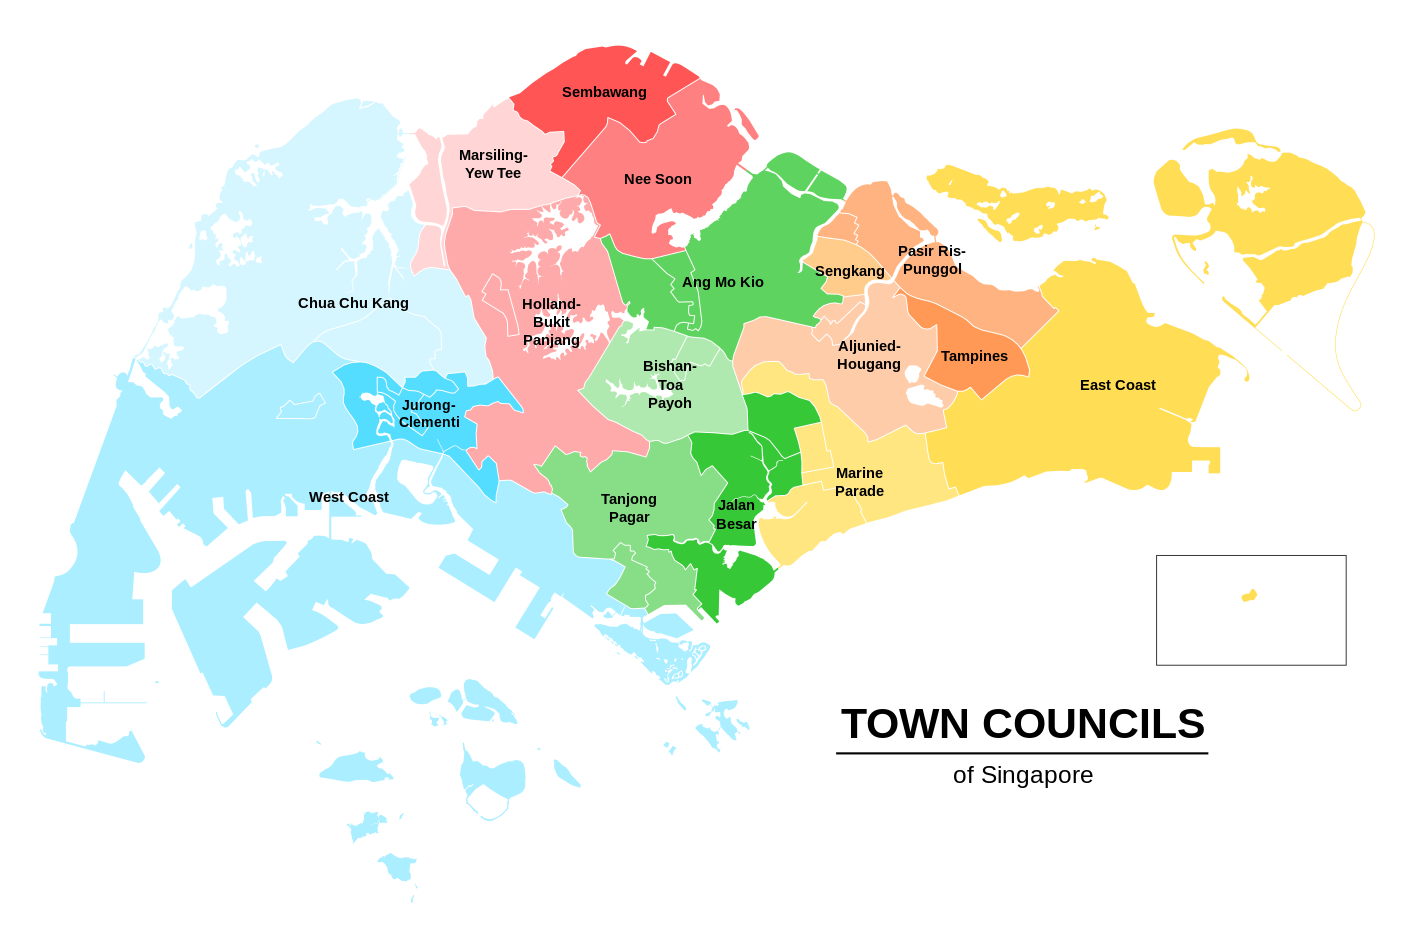 Town Councils map of Singapore 2020.svg